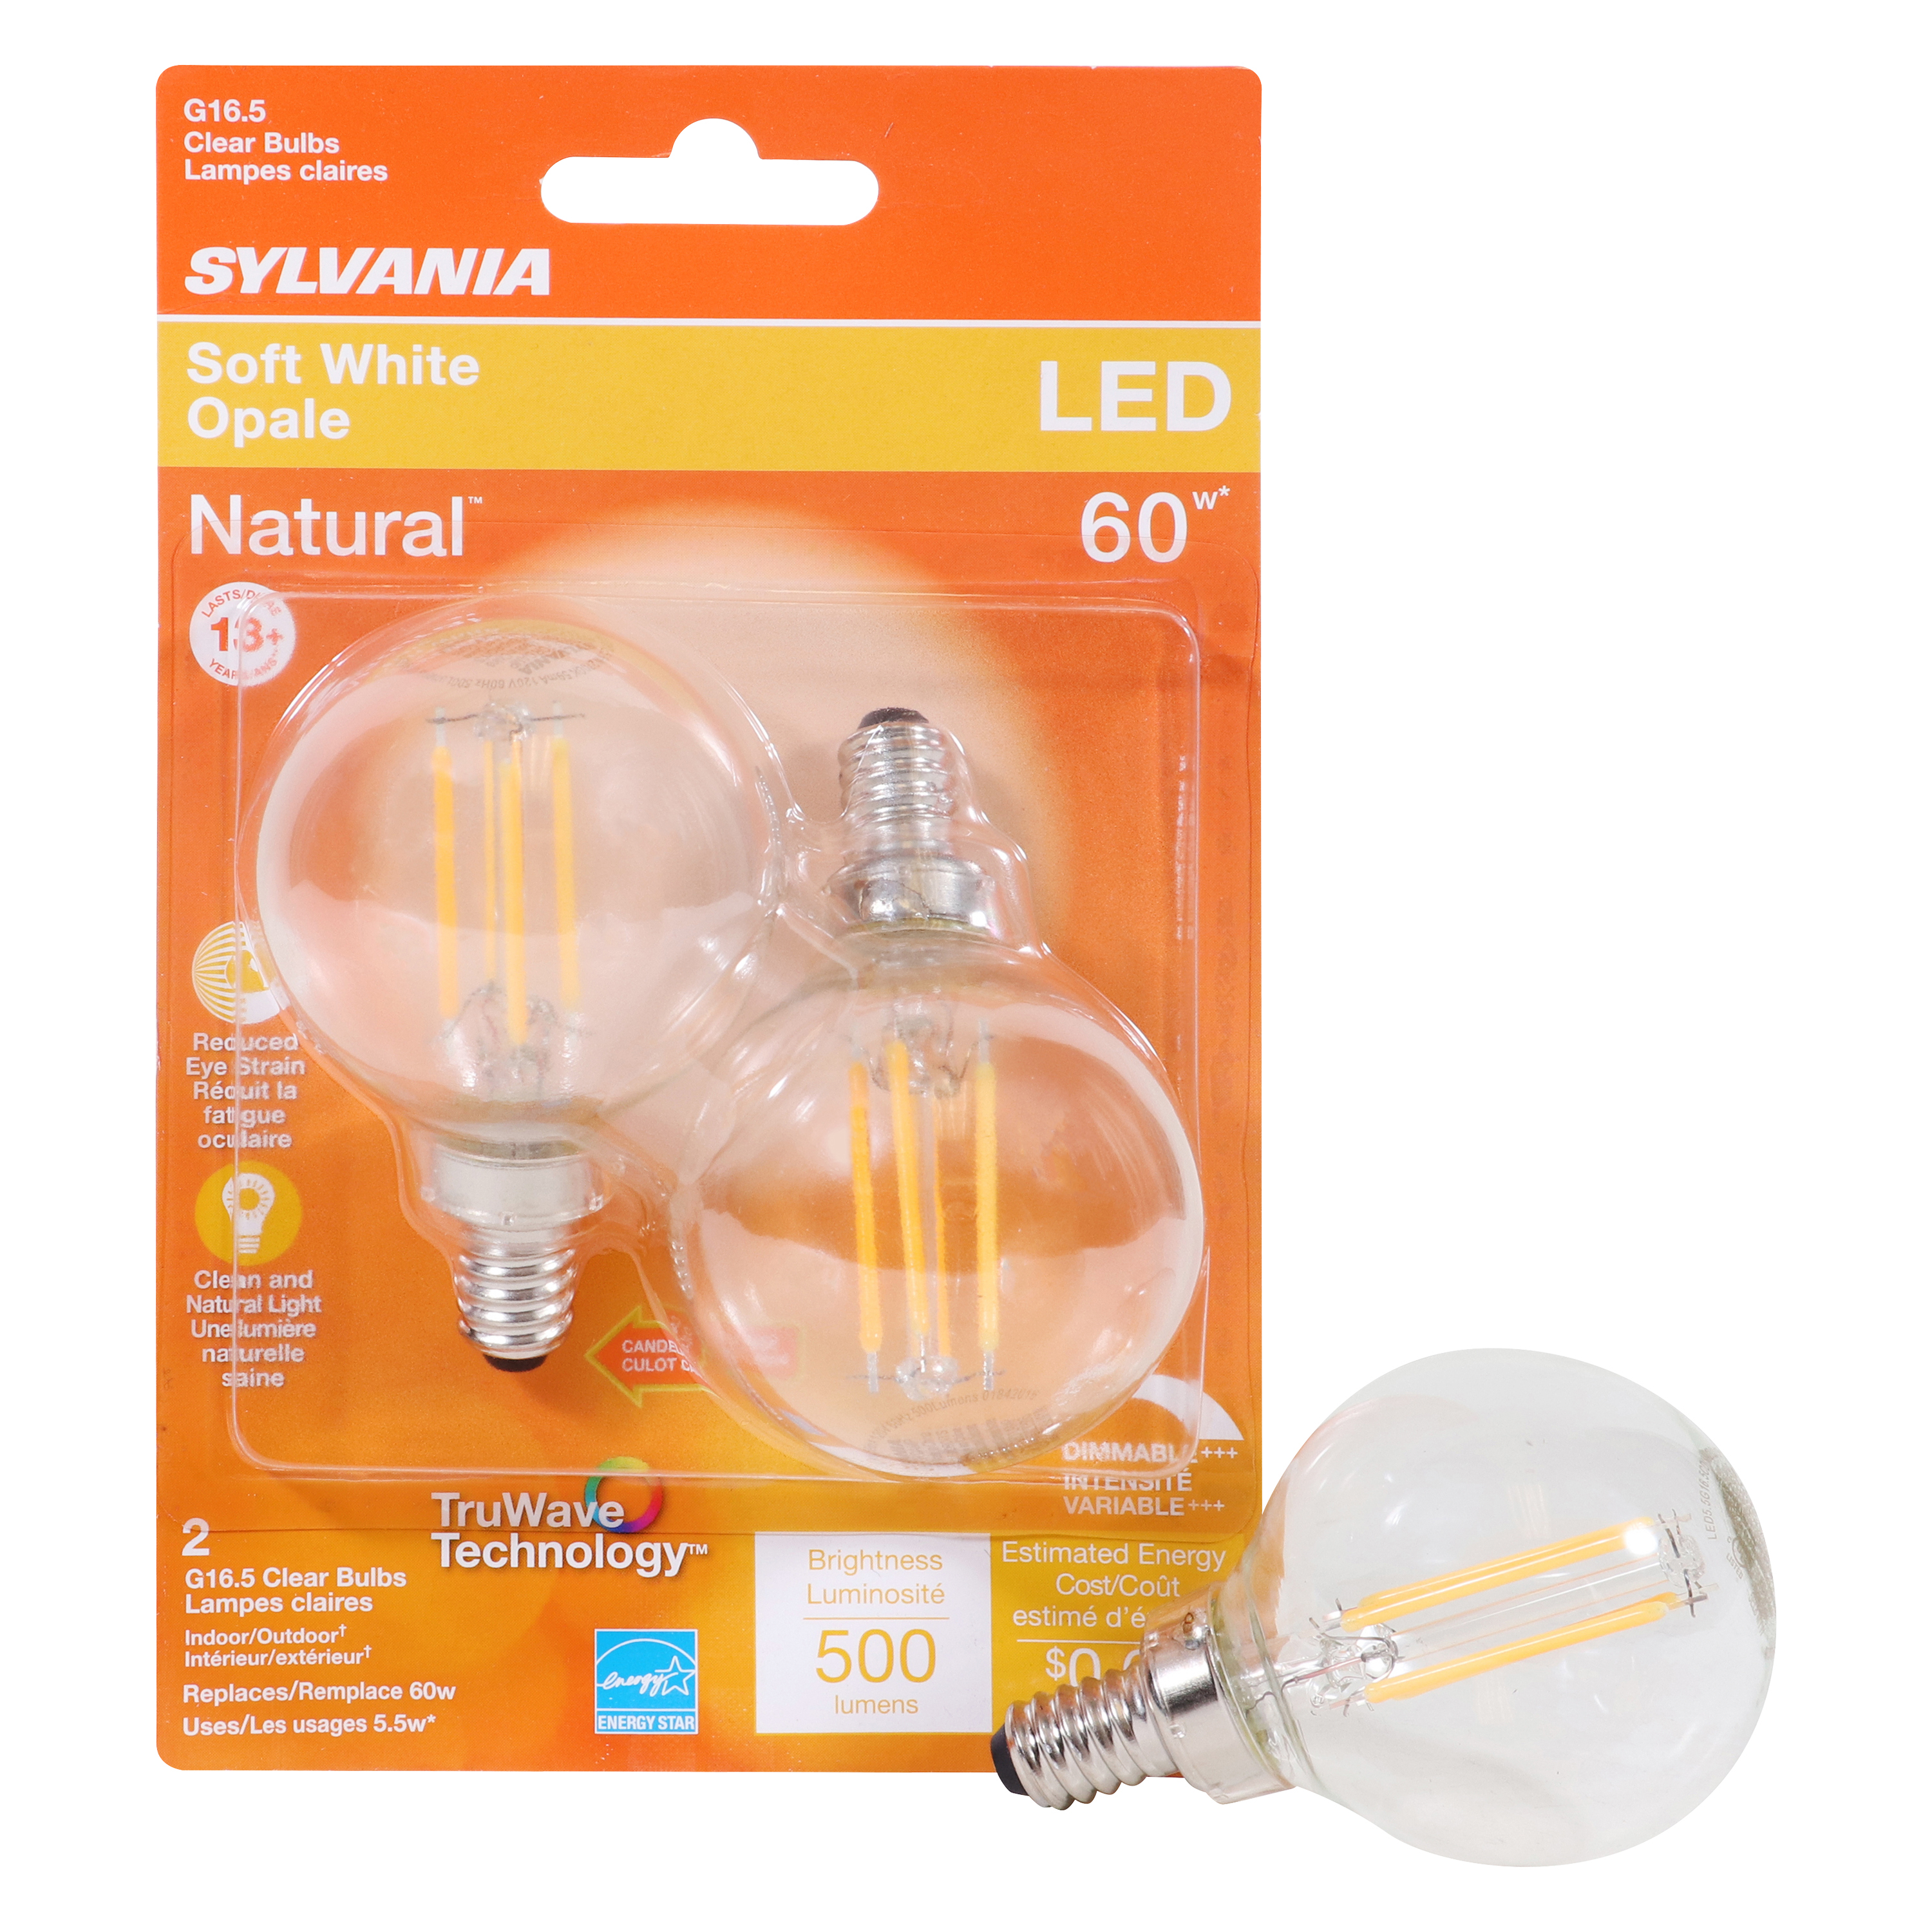 40852 LED Bulb, Decorative, G16.5 Lamp, 60 W Equivalent, E12 Lamp Base, Dimmable, Clear, Soft White Light